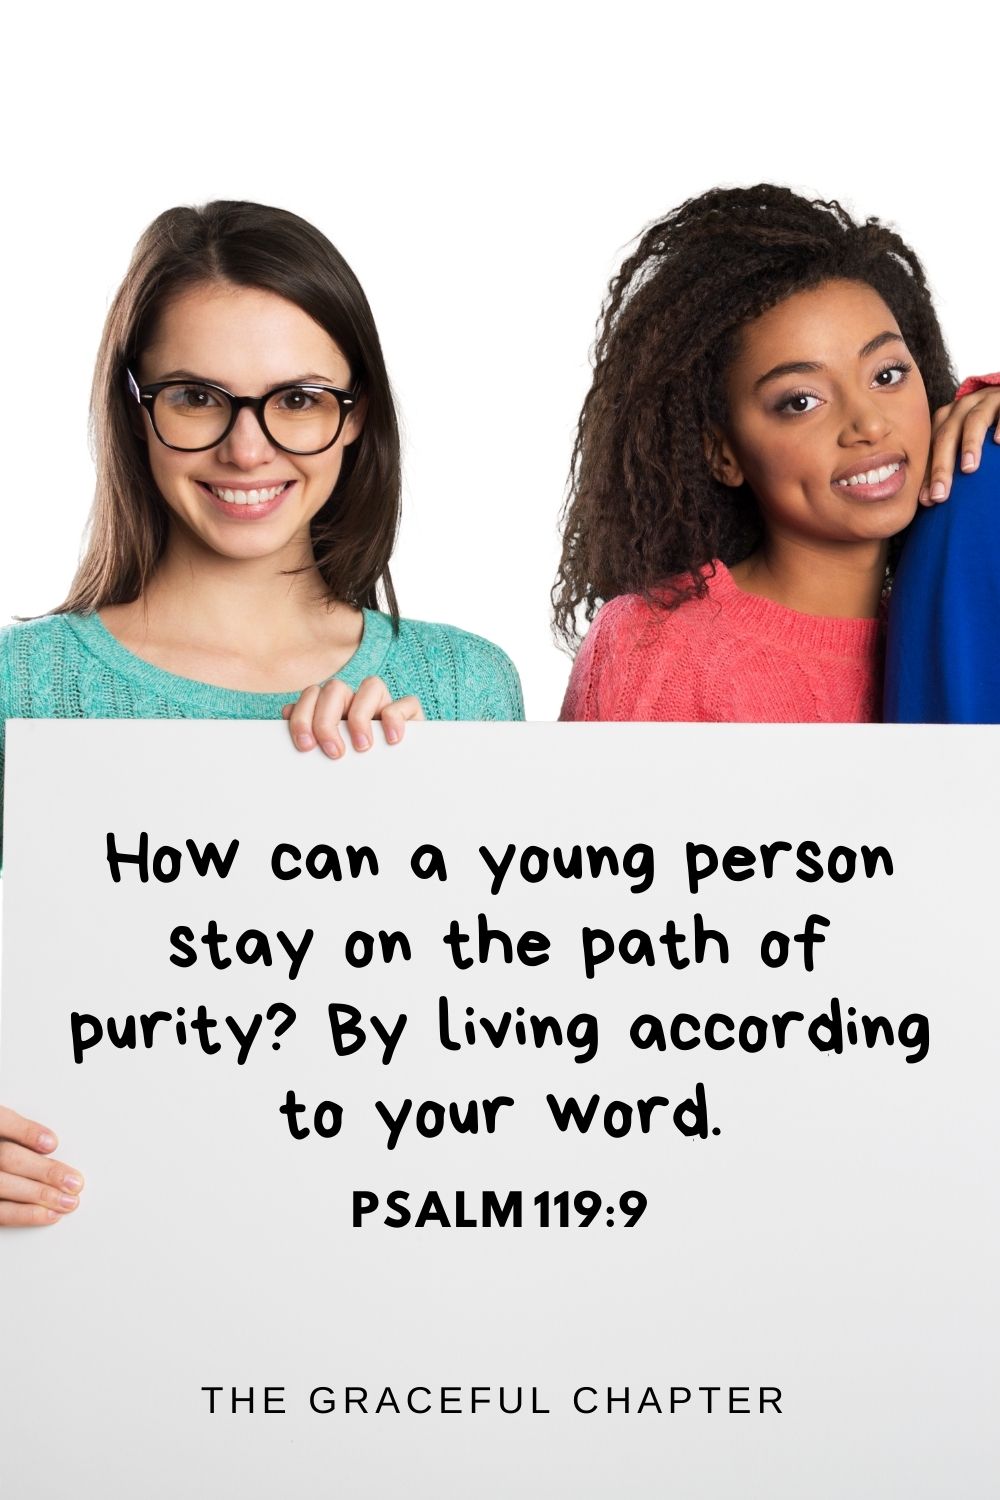 How can a young person stay on the path of purity? By living according to your word. Psalm 119:9